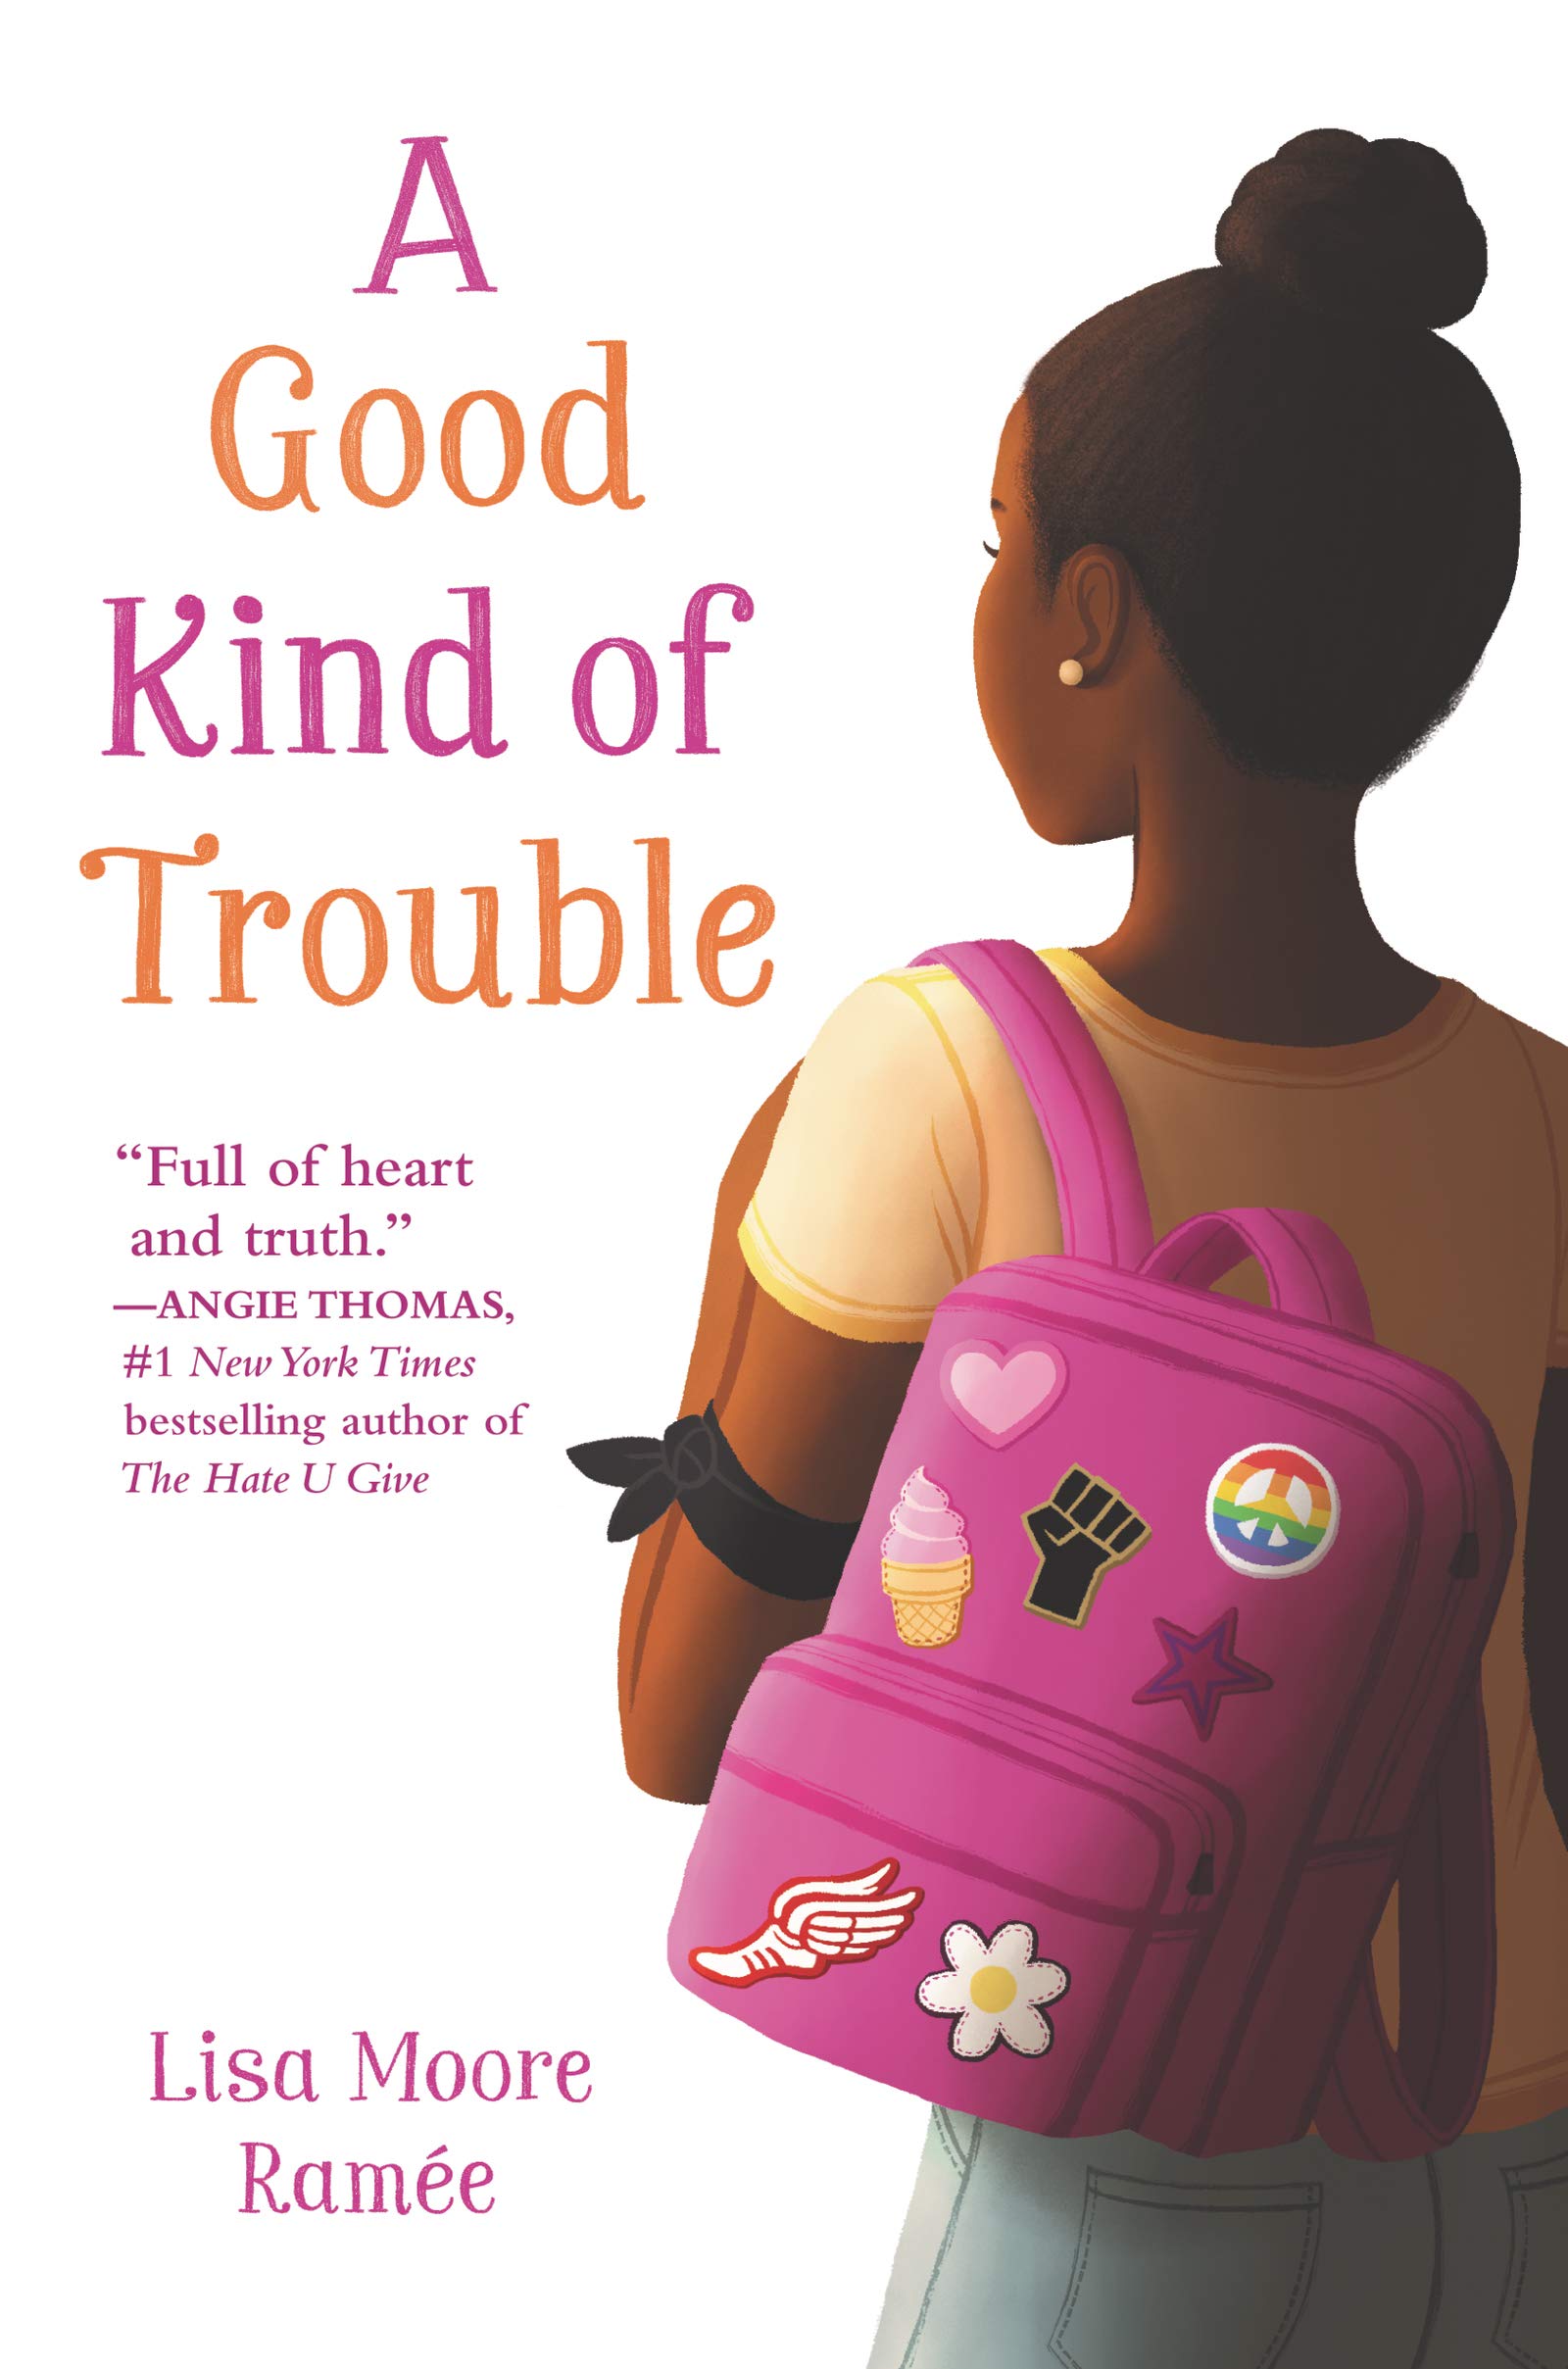 A Good Kind of Trouble, book cover